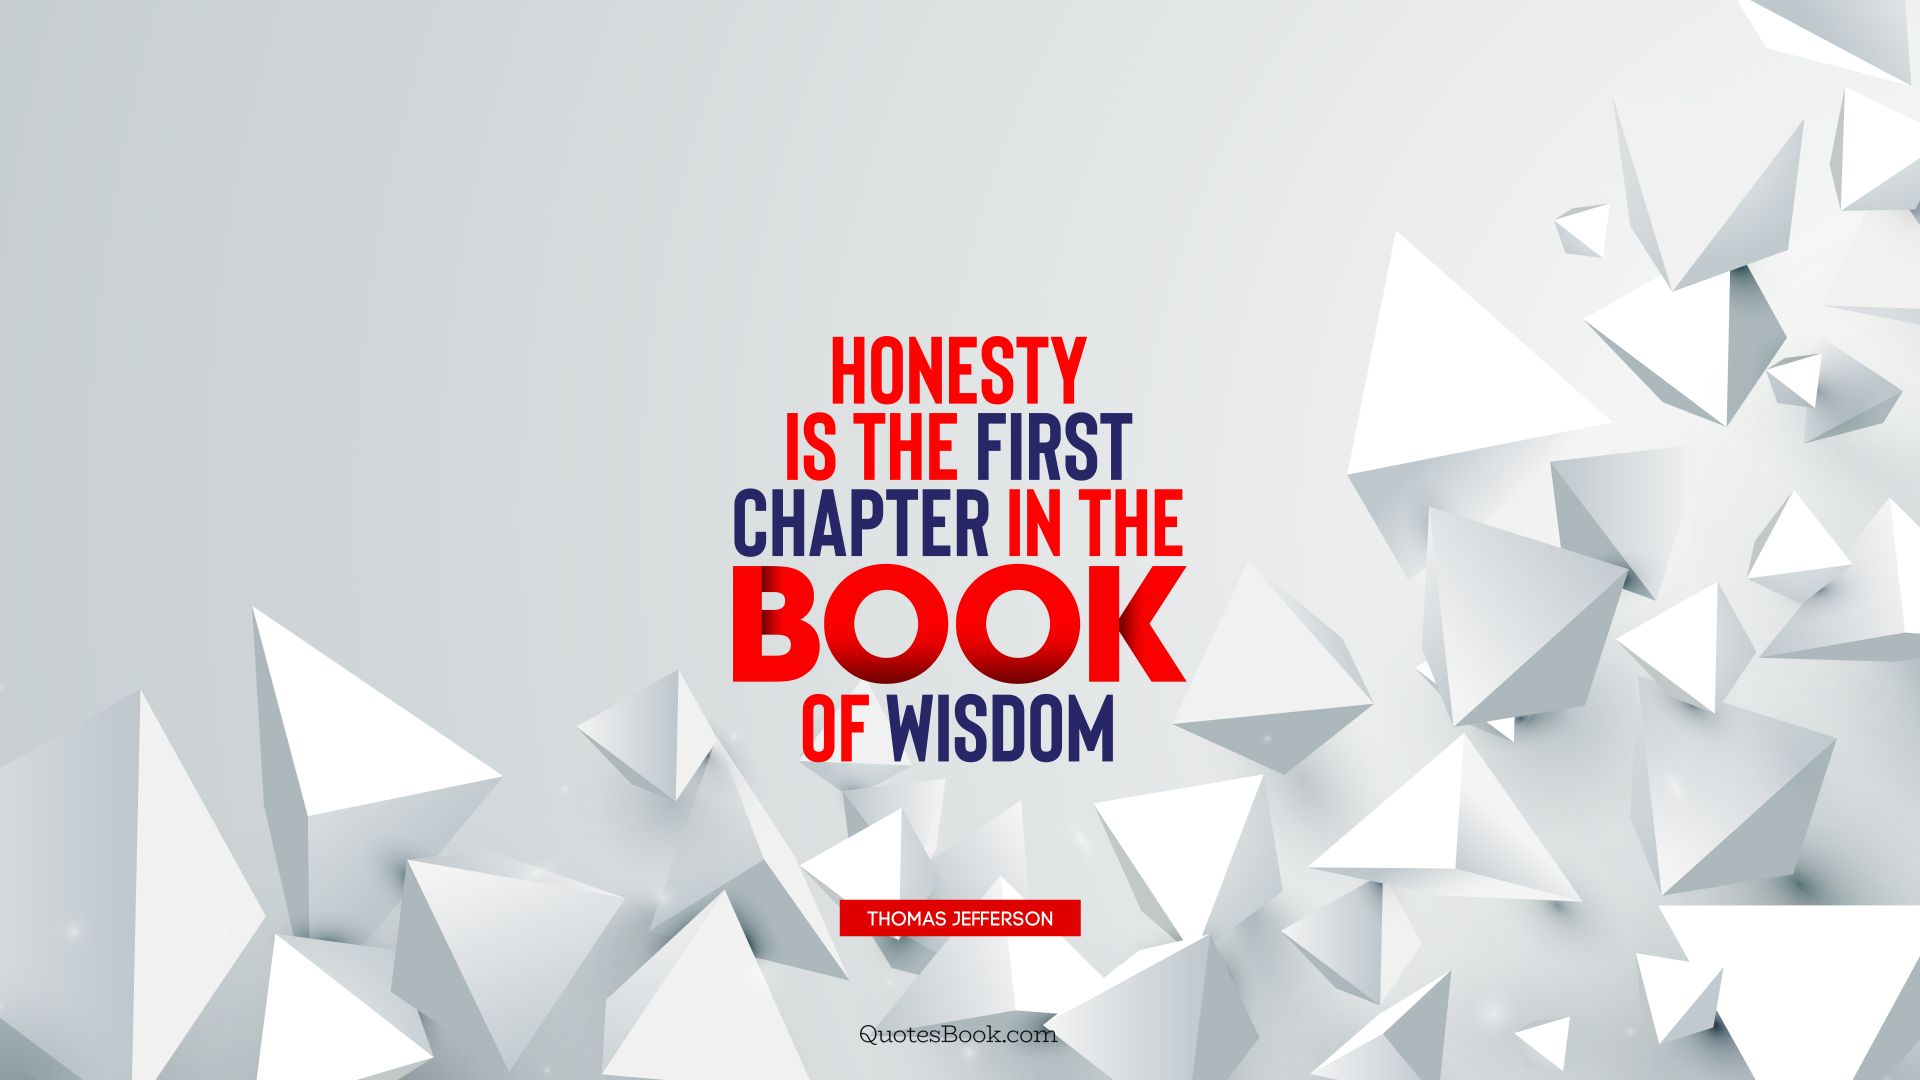 Honesty is the first chapter in the book of wisdom. - Quote by Thomas Jefferson 